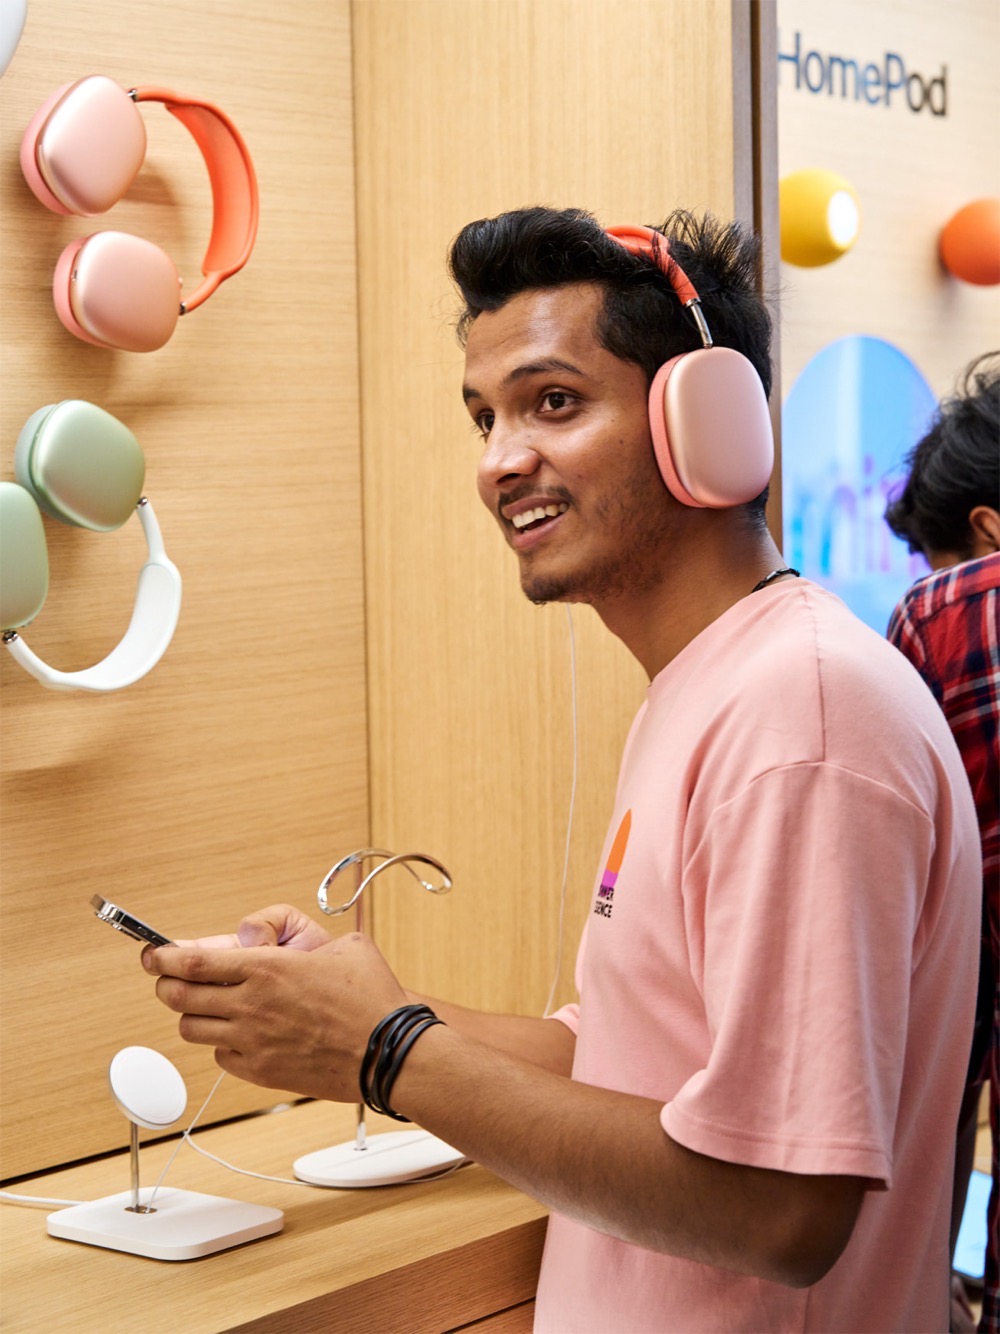 Apple Saket Delhi India opening day customer with AirPods Max inline jpg large 2x